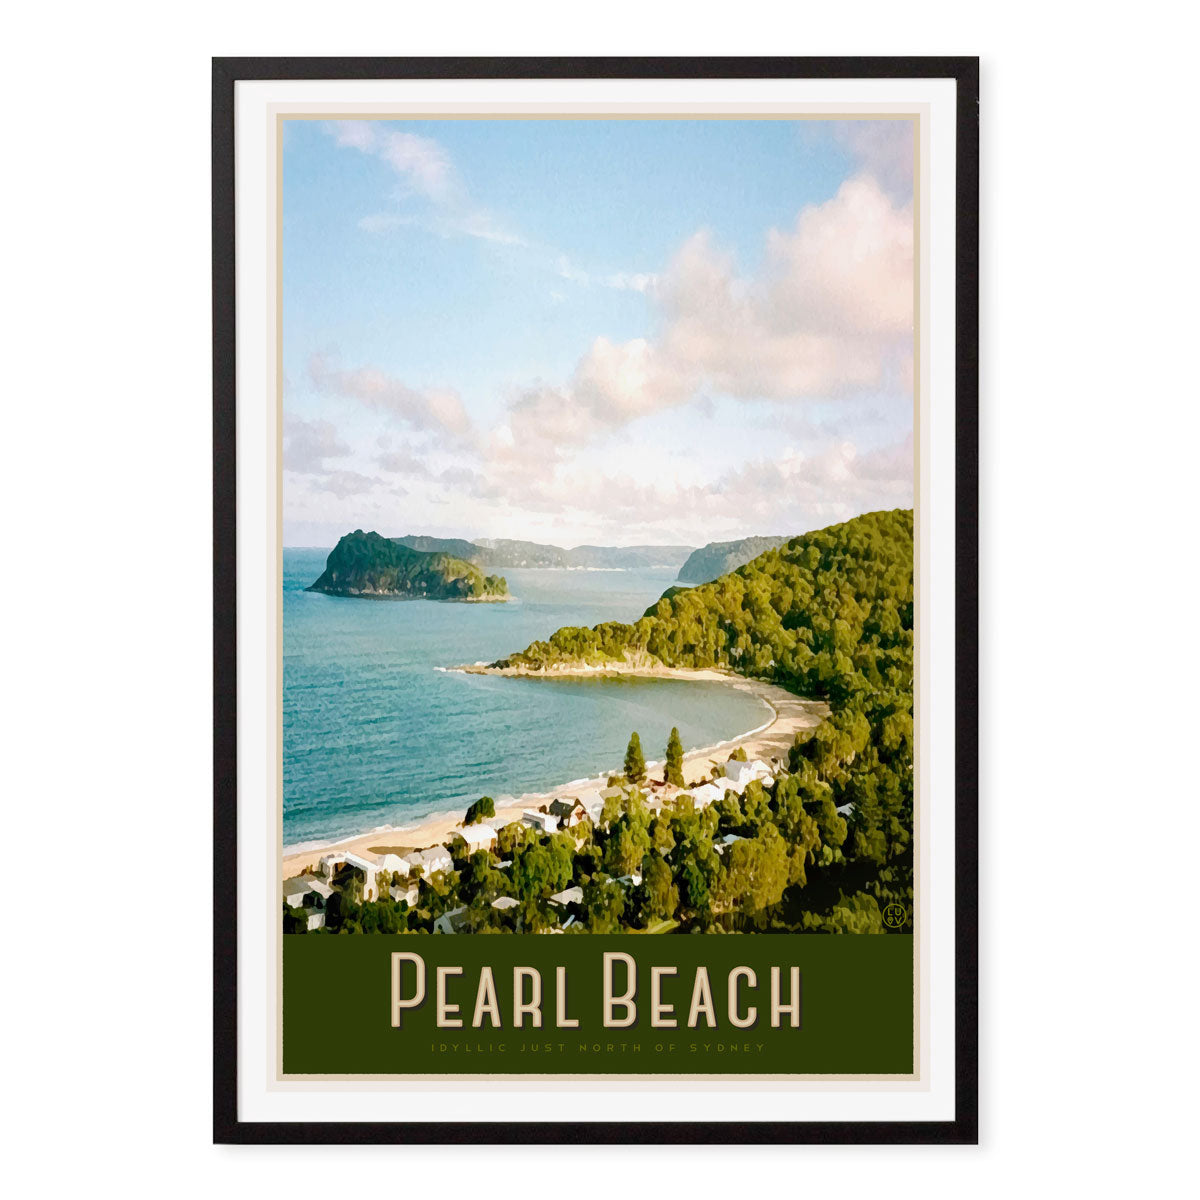 Pearl beach vintage travel poster in black frame central coast by places we luv